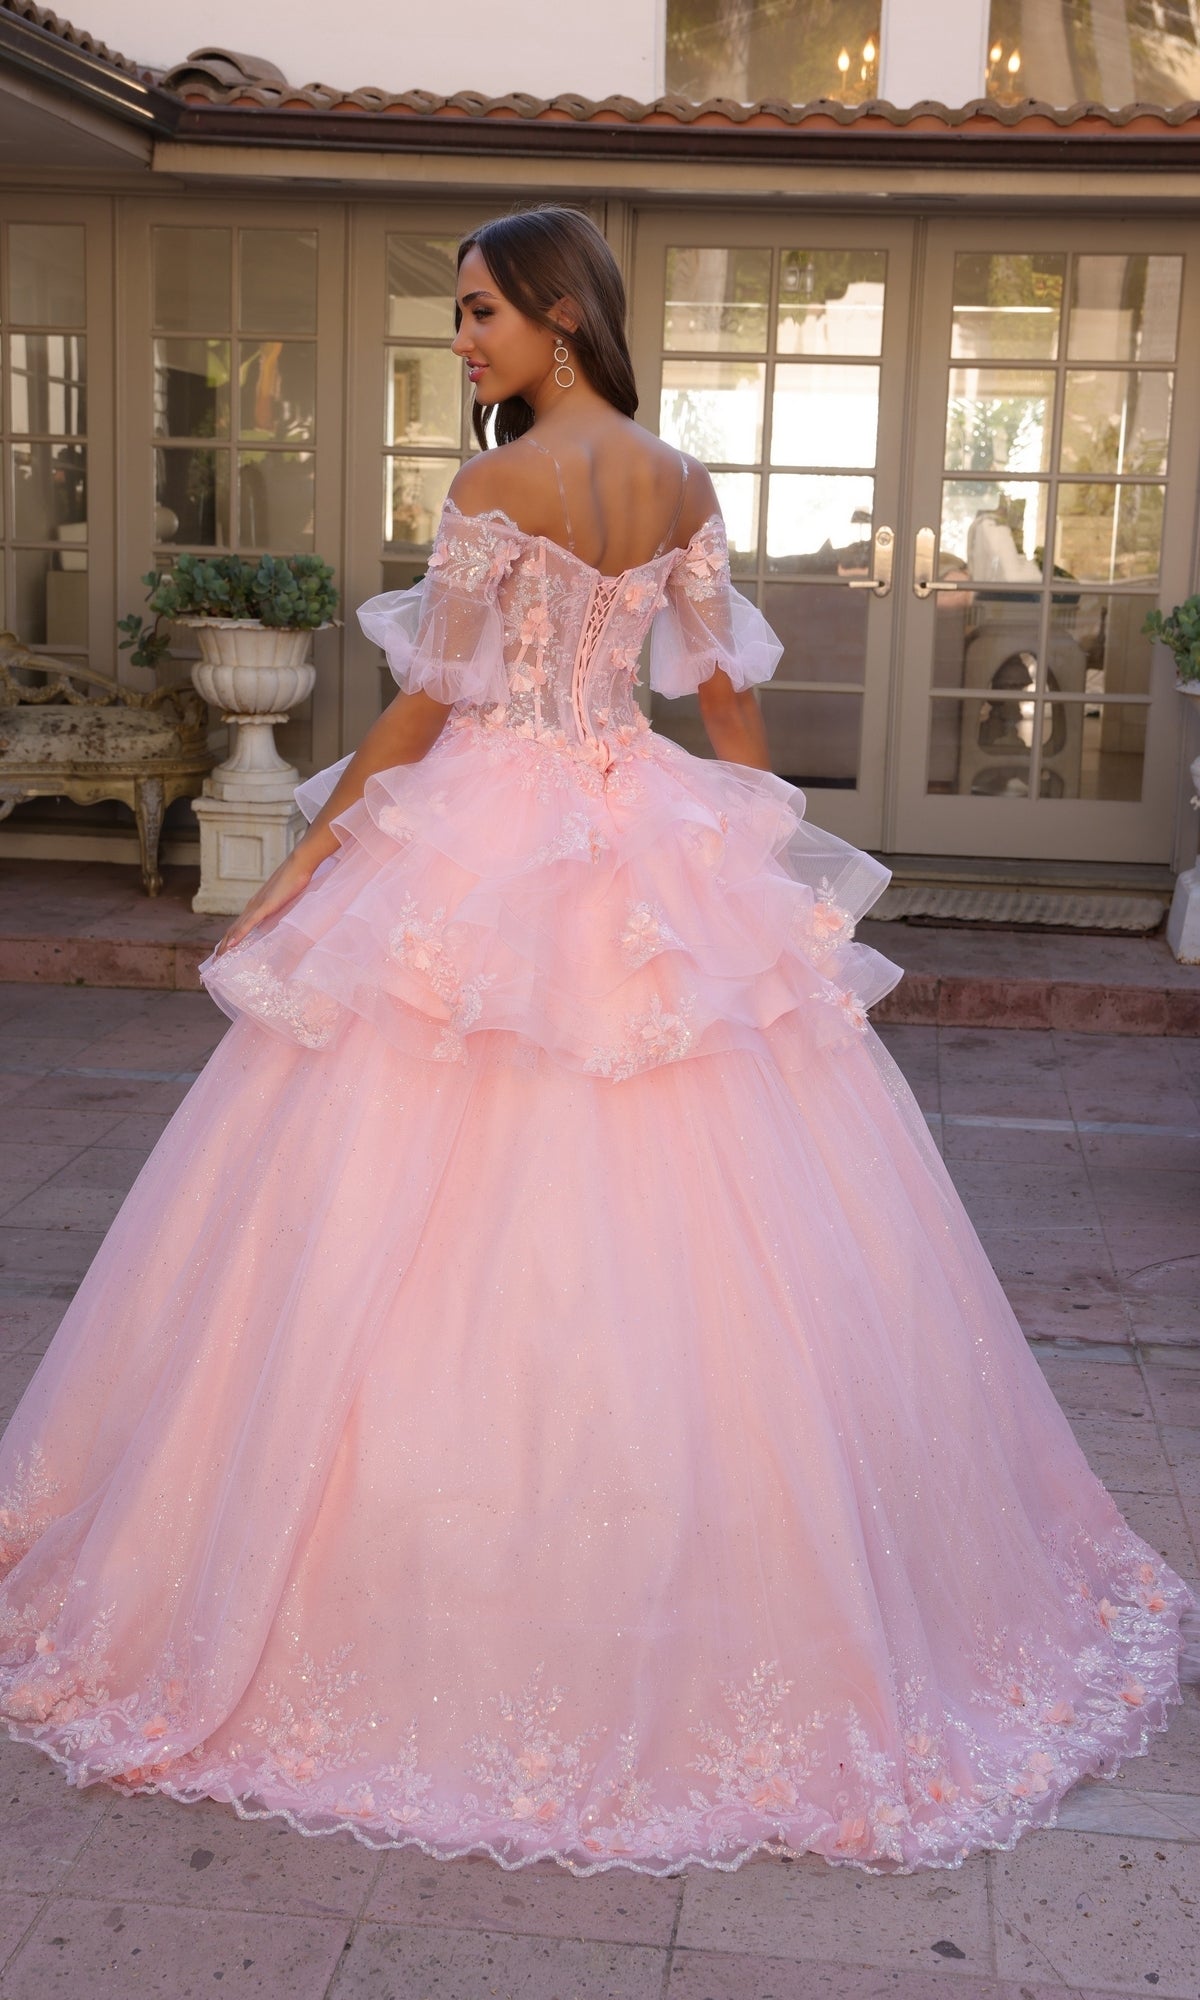 AURIELIE Pink 3D Floral Convertible Tulle Layered Oversize Ball Gown School Formal & Prom Dress